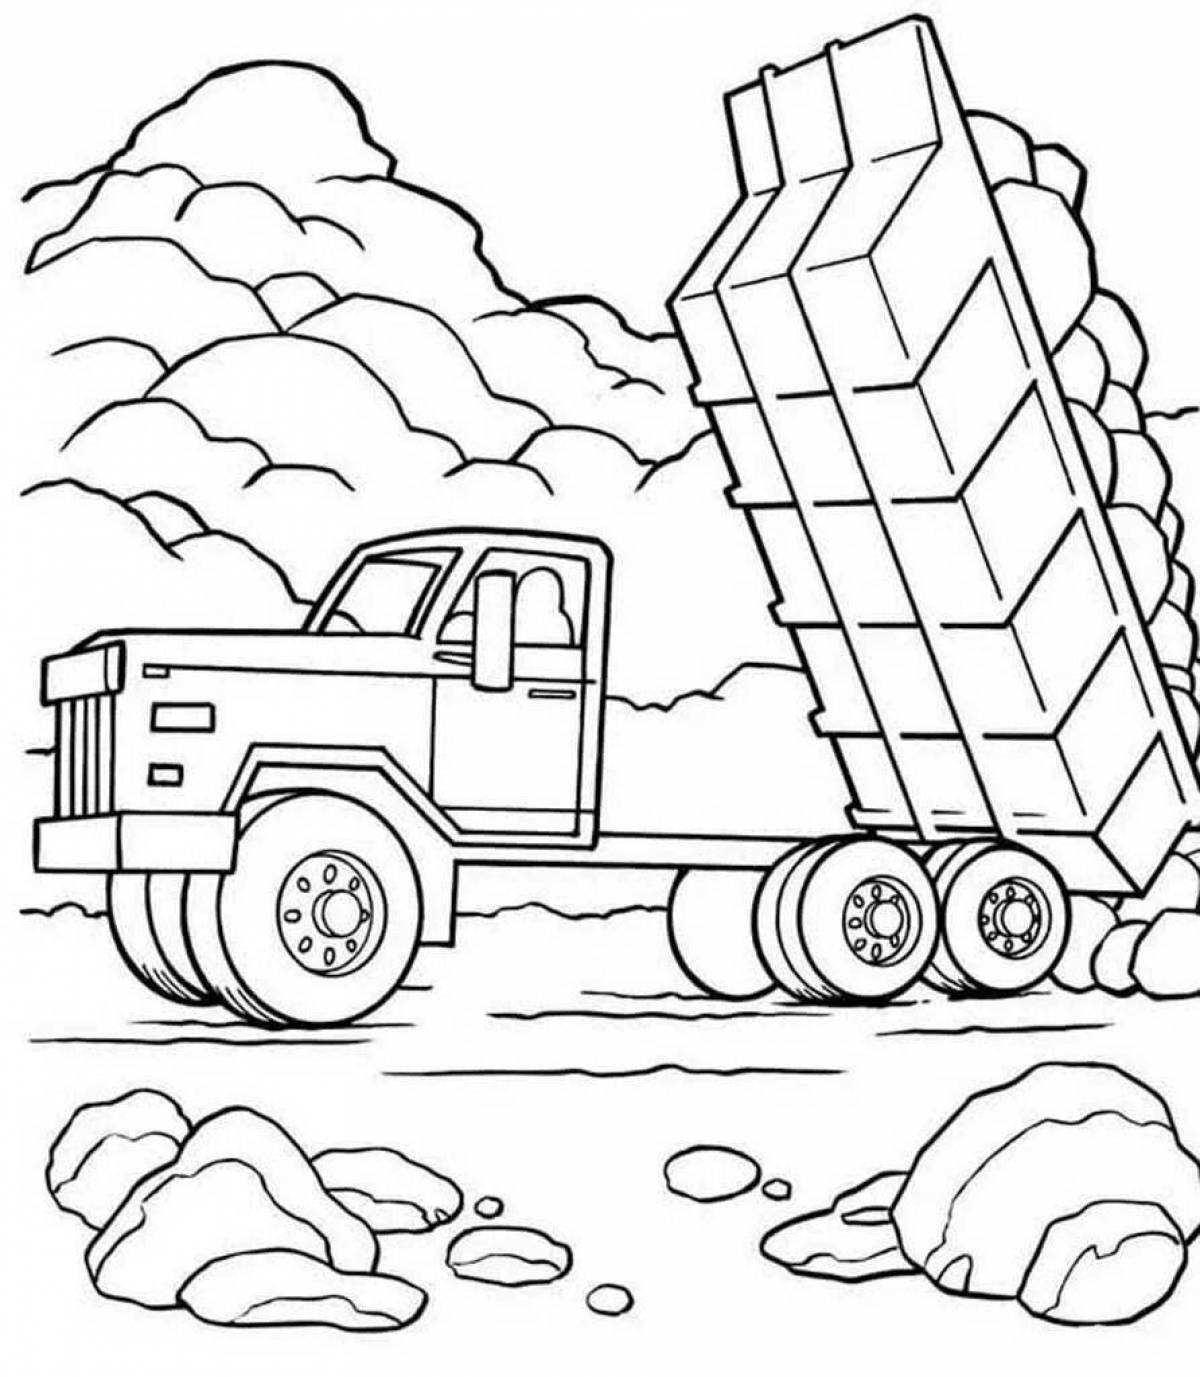 KAMAZ bright coloring book for children 4-5 years old